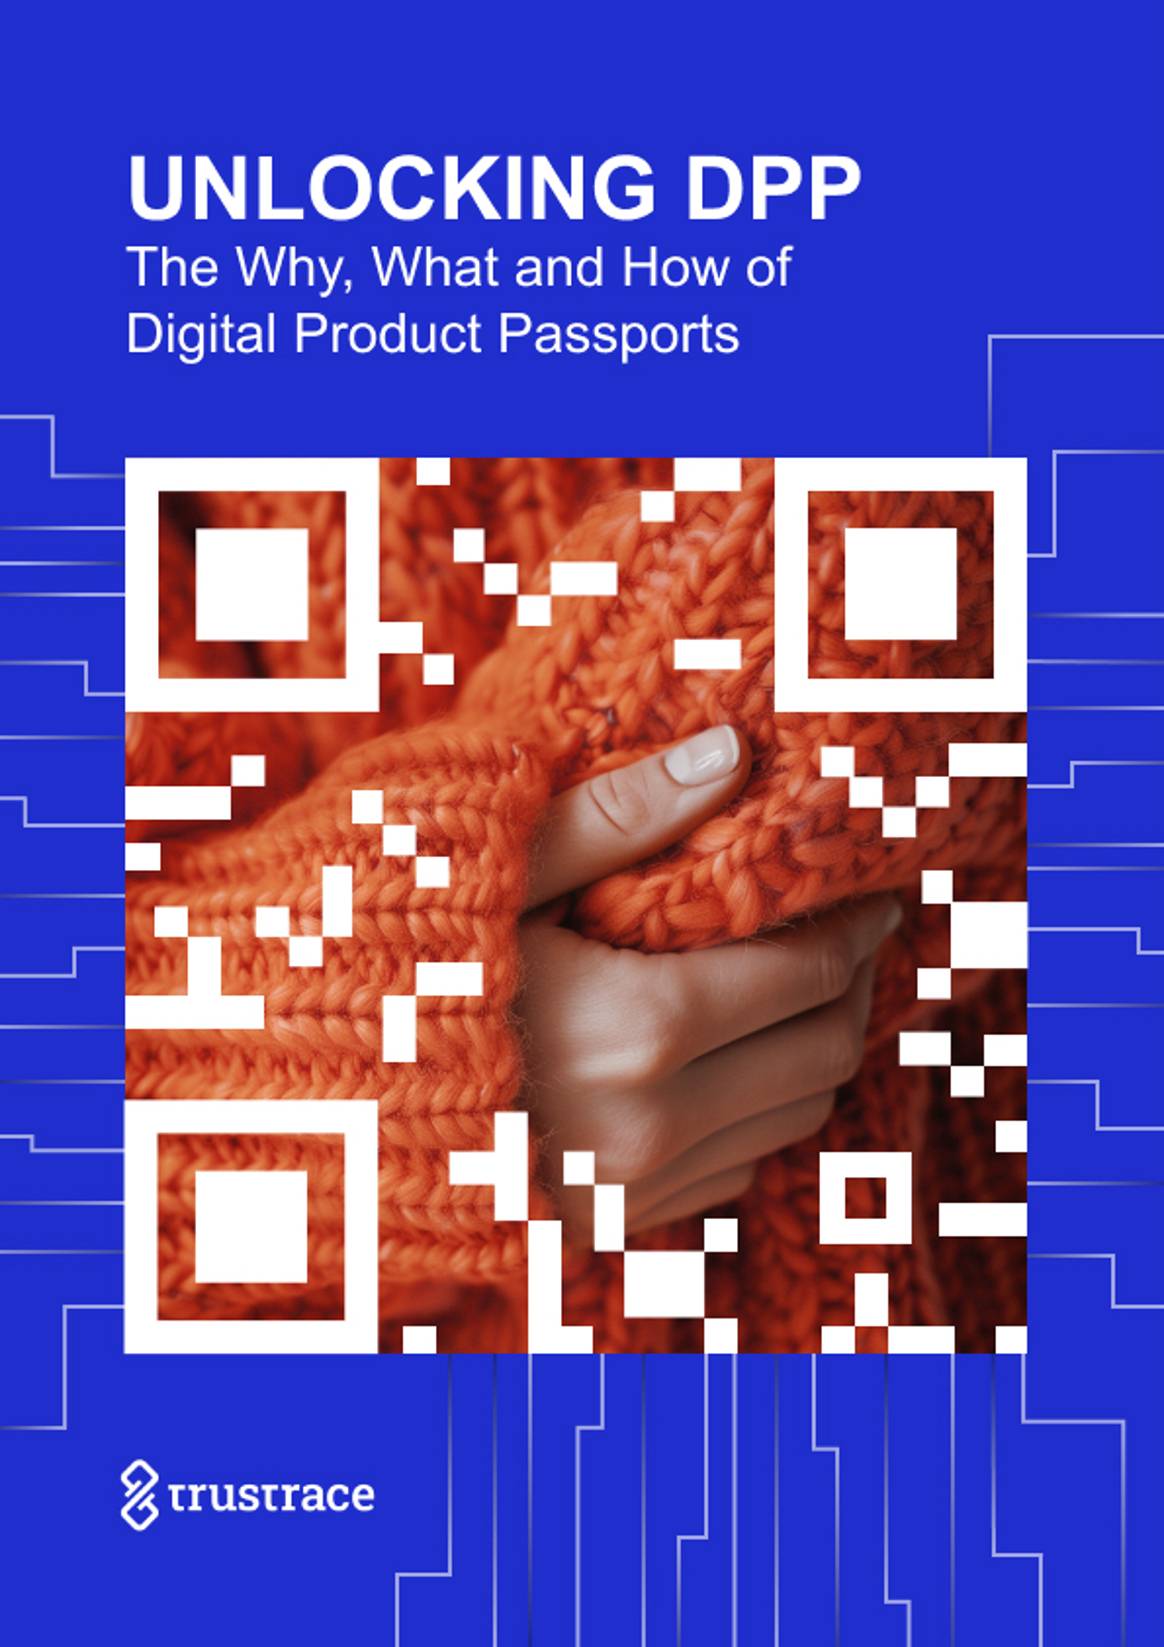 “Unlocking Dpp The Why, What and How of Digital Product Passports”.